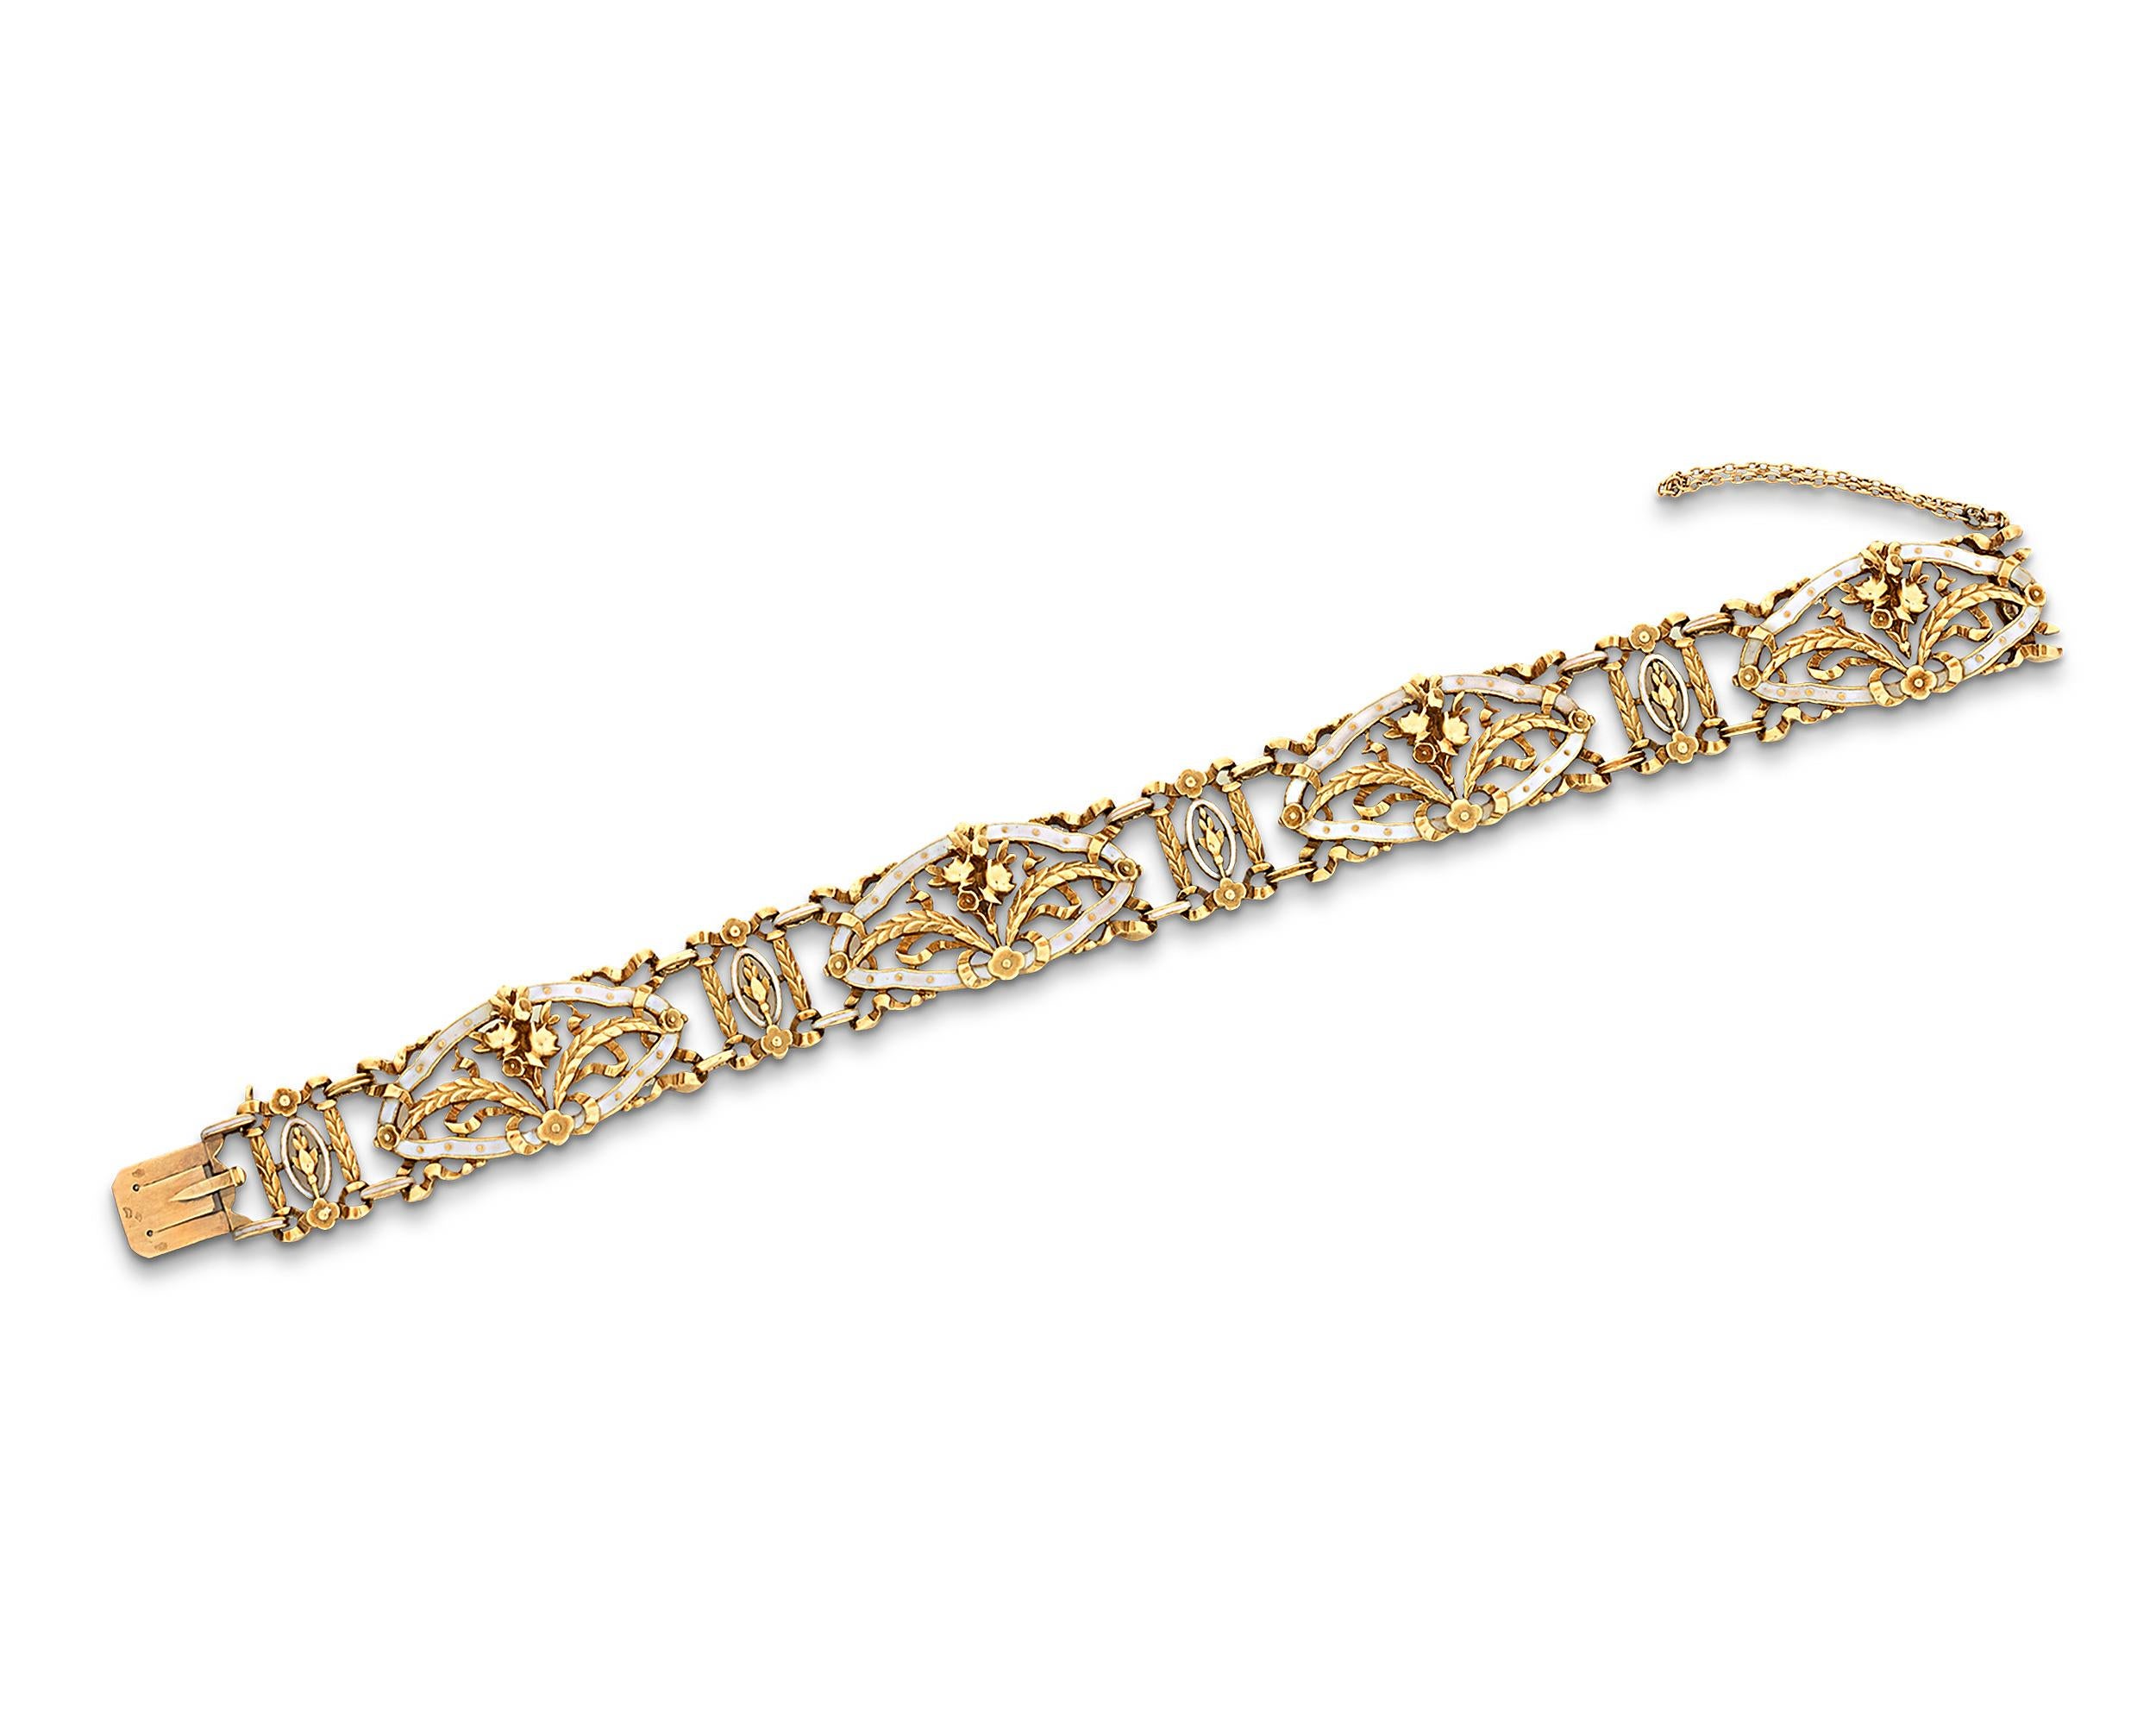 Crafted by the legendary French designer Lucien Gautrait, this extraordinary bracelet is a stunning work of jewelry design. The 18K yellow gold bracelet features an array of florals and festoons that reveal the overlap between Victorian and Art